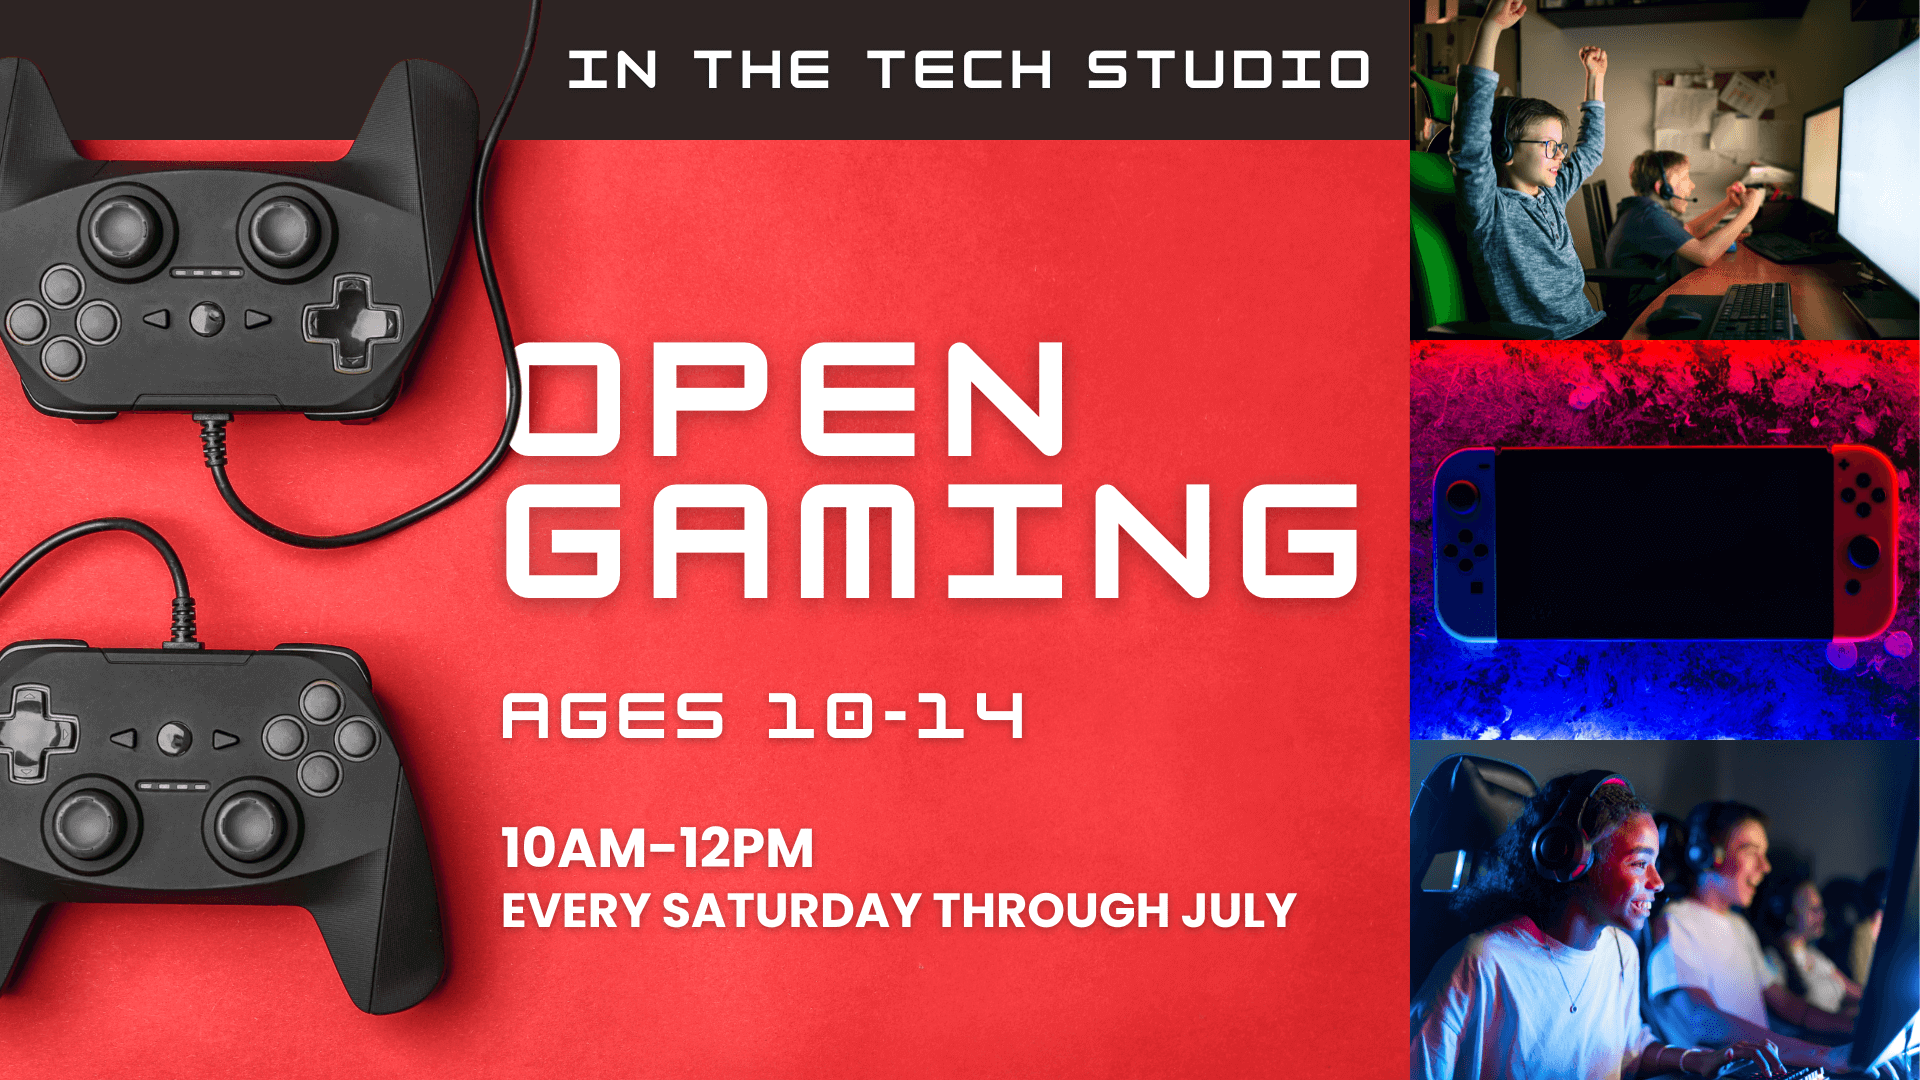 Advertisement for 'Open Gaming' in the Tech Studio for ages 10-14, featuring two black game controllers on a red background, scheduled for every Saturday through July from 10 AM to 12 PM. The right side of the image has three smaller pictures: one of two boys gaming on PCs, one of a Nintendo Switch console, and one of a group of children gaming together with headsets.